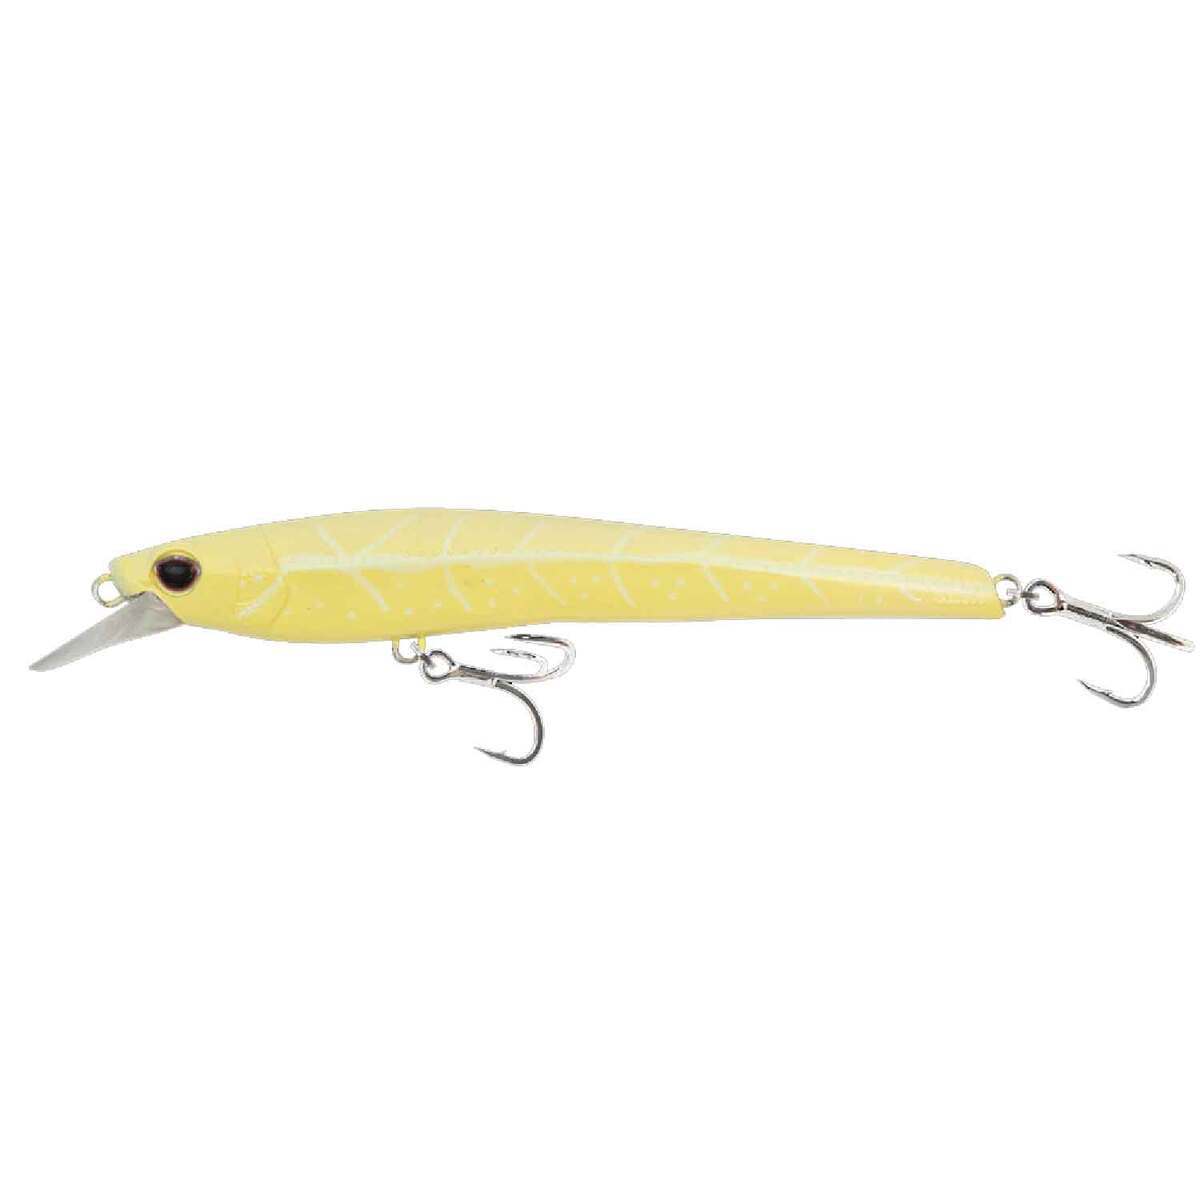 deadly dick lures, metal lures, bass lures, spinning for seatrout